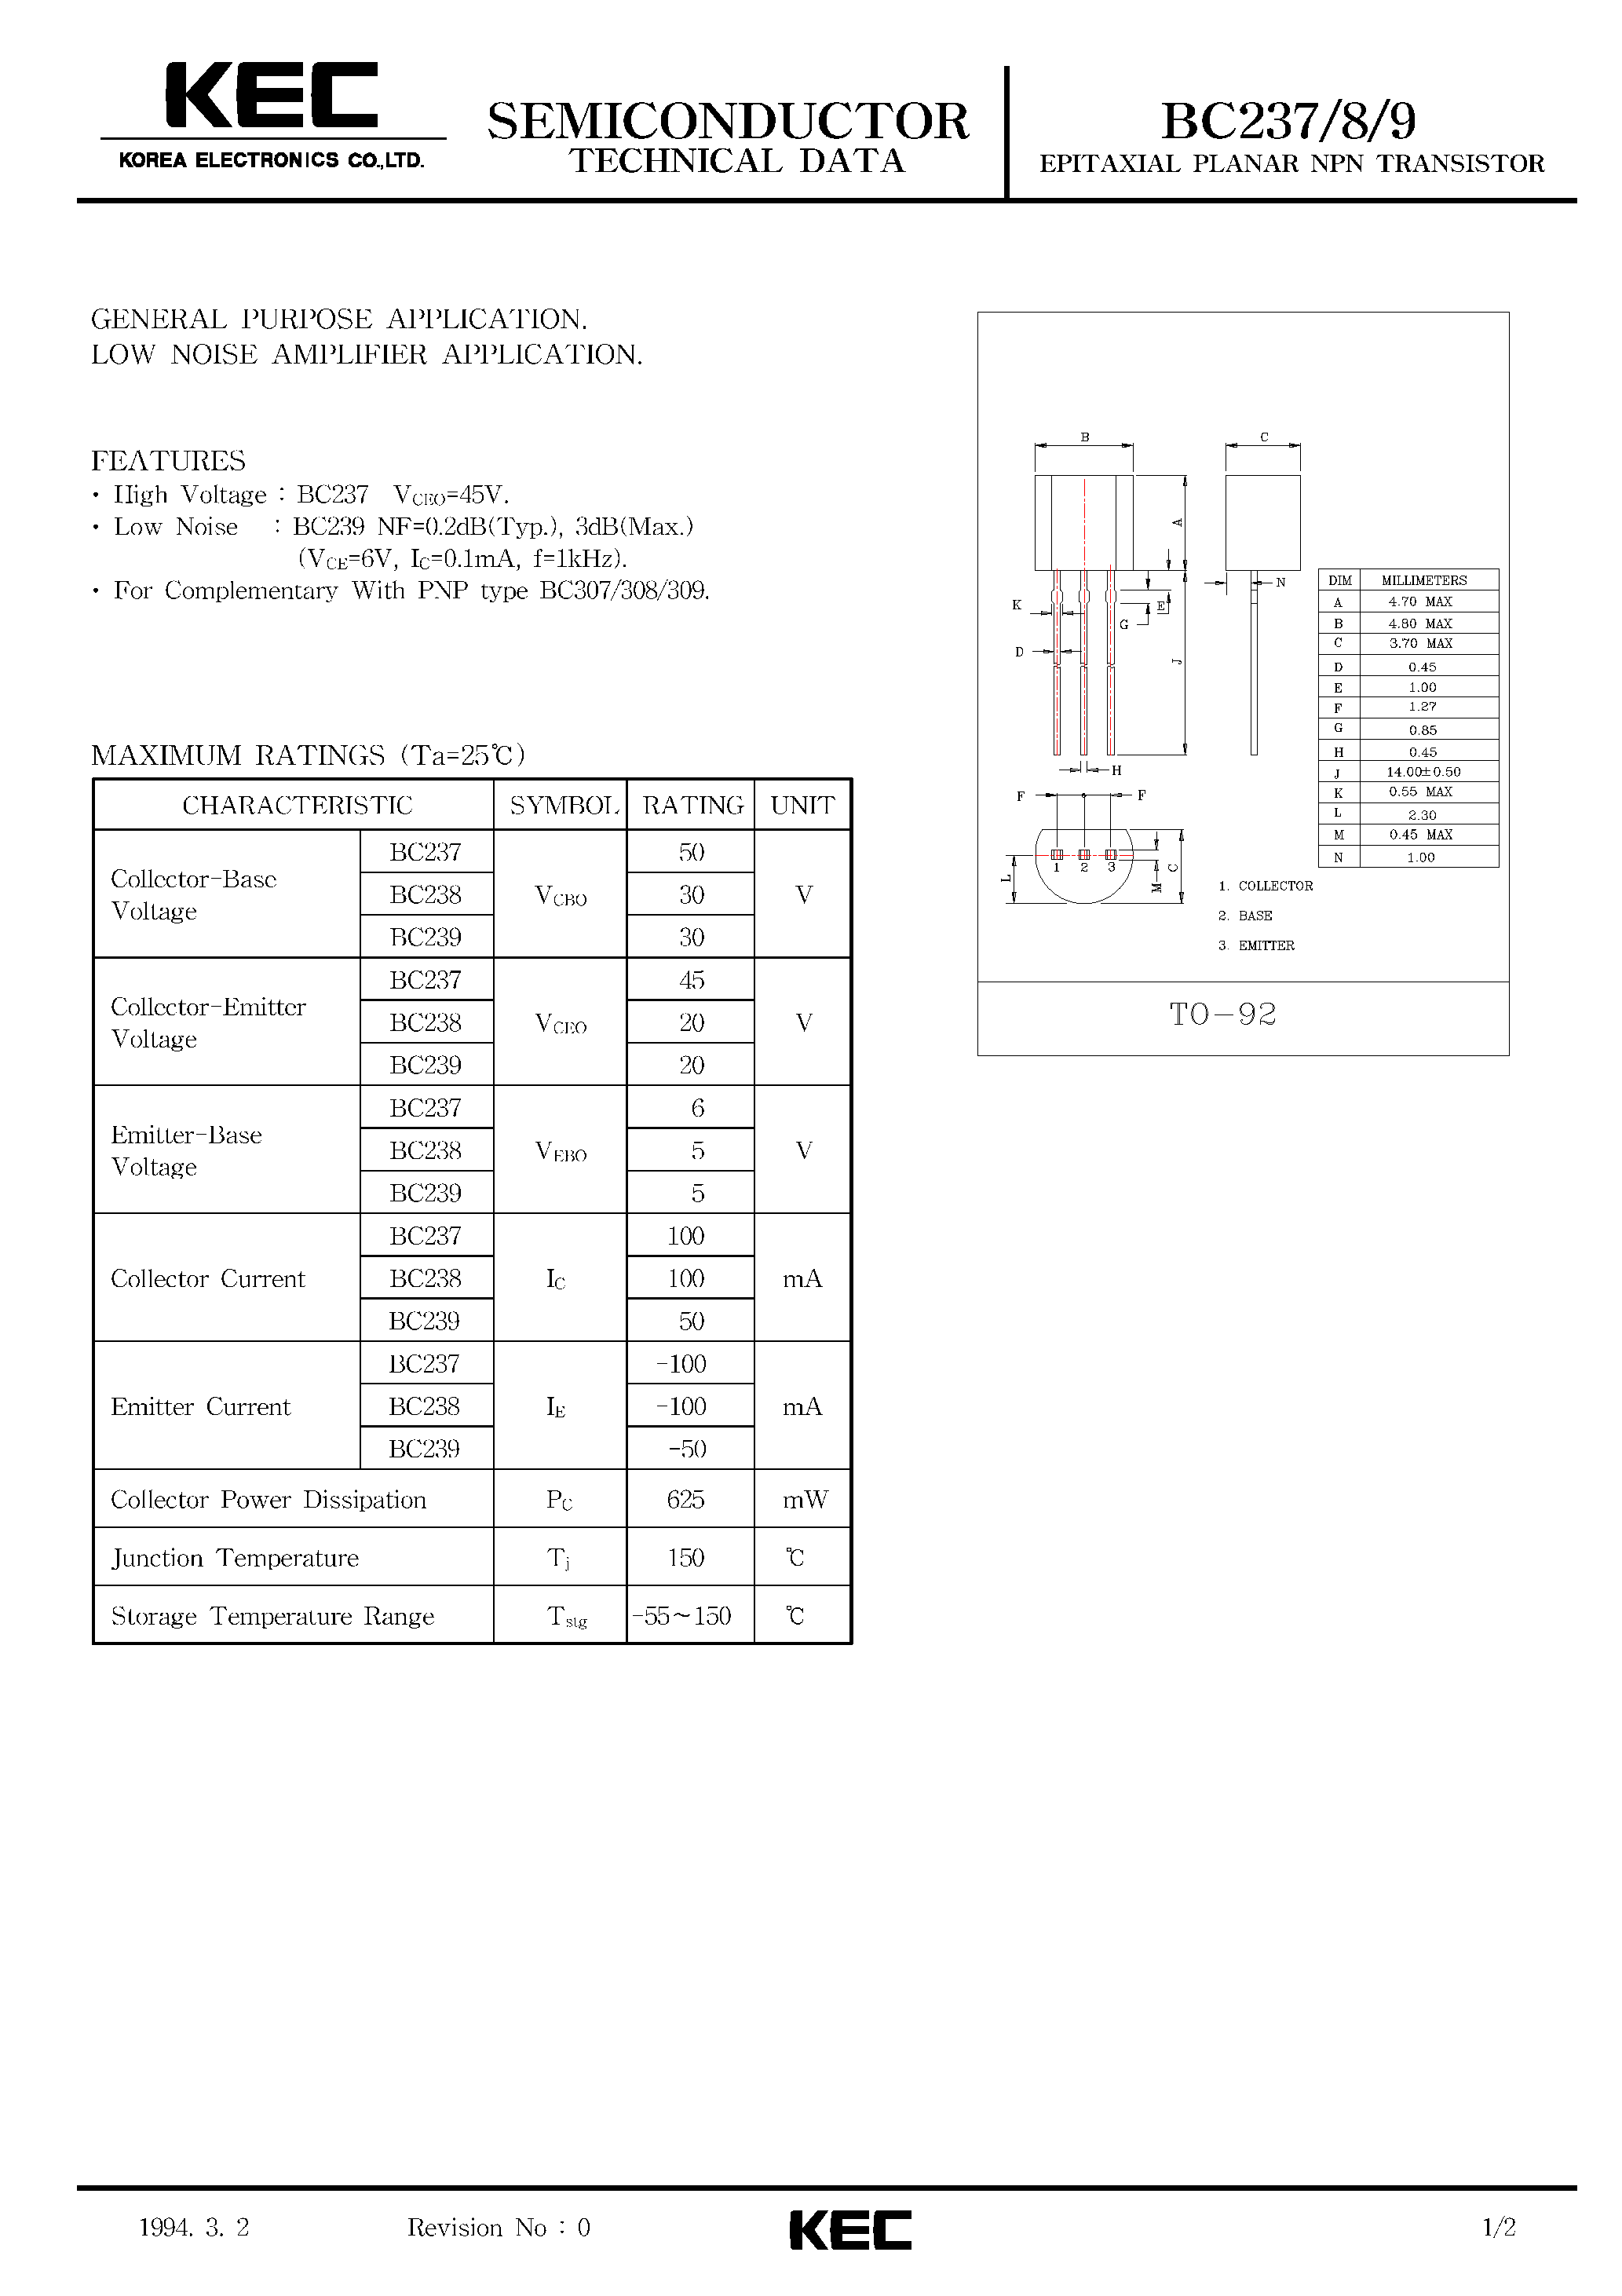 Даташит BC239 - EPITAXIAL PLANAR NPN TRANSISTOR (GENERAL PURPOSE / LOW NOISE AMPLIFIER) страница 1